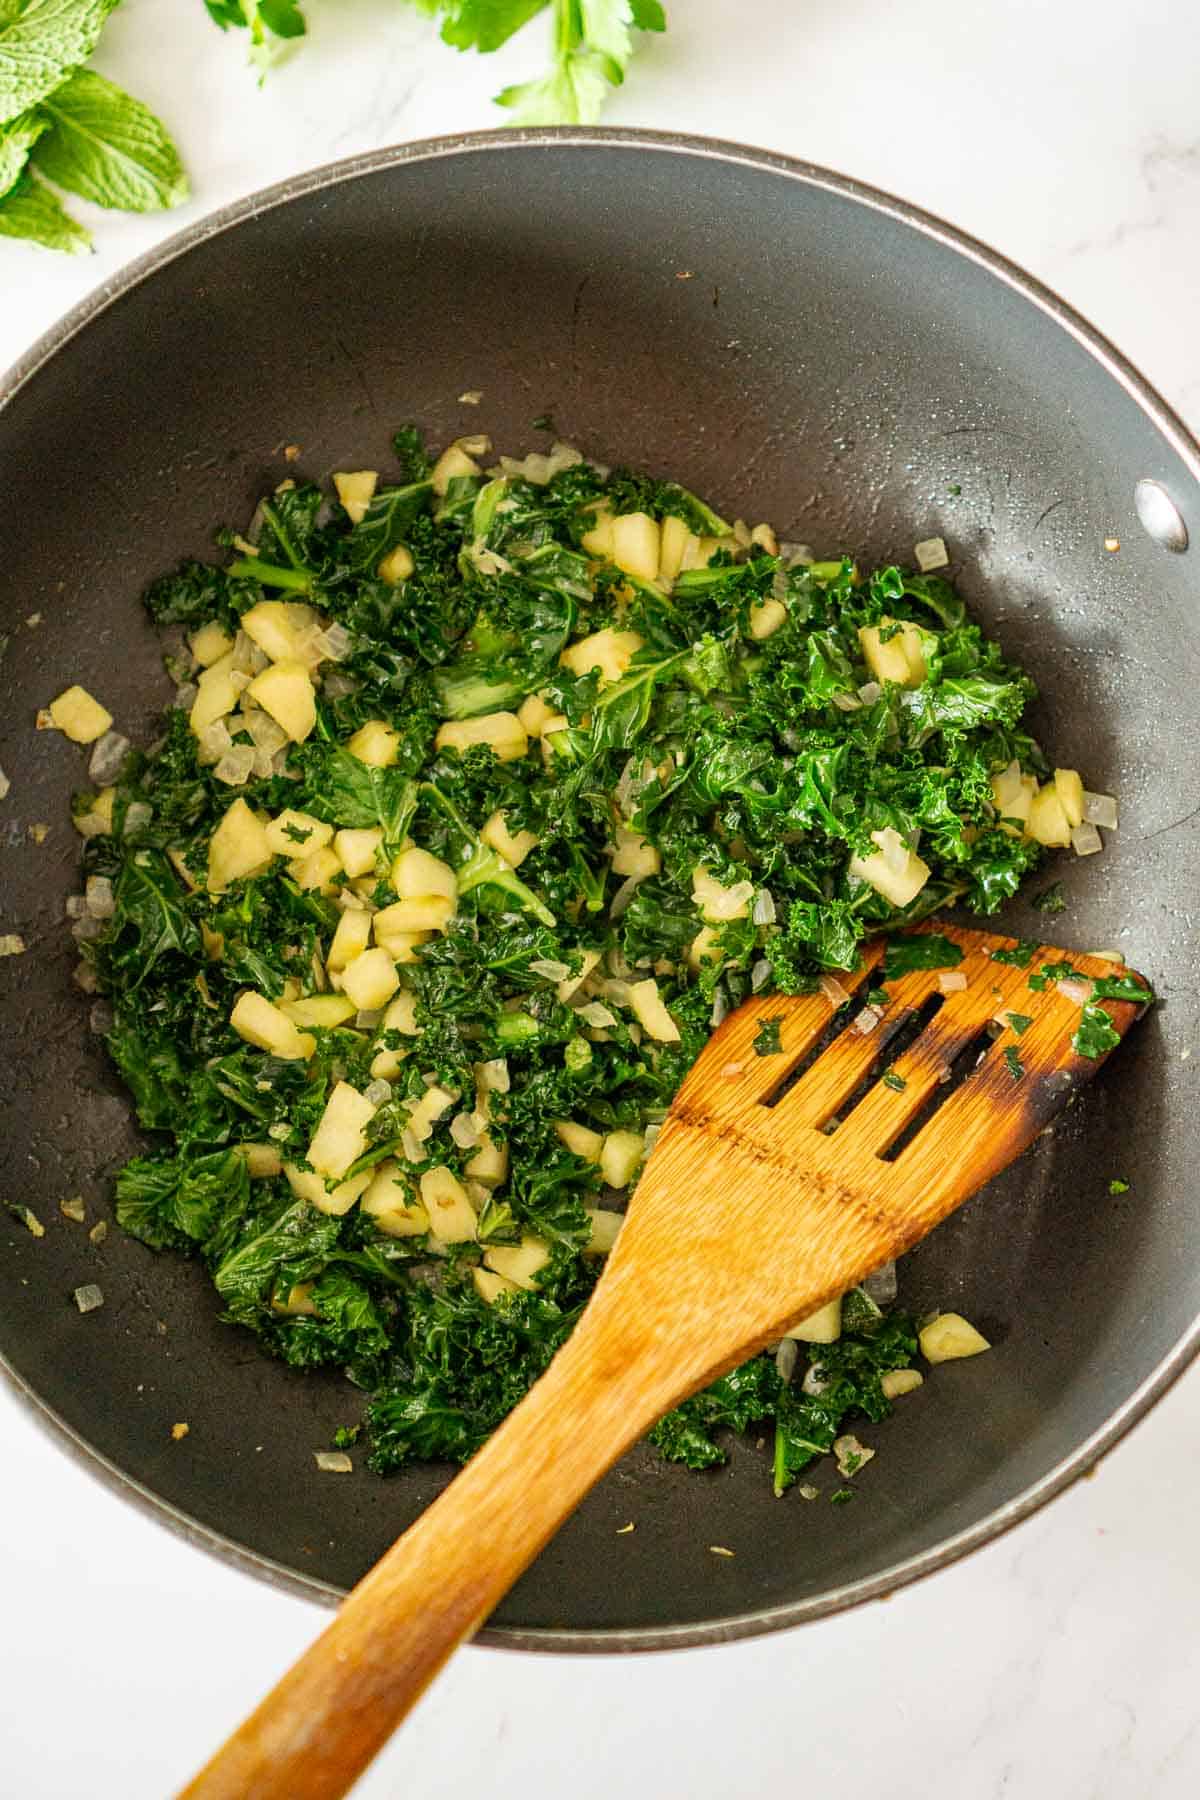 Sauteing kale and apples in a pan.